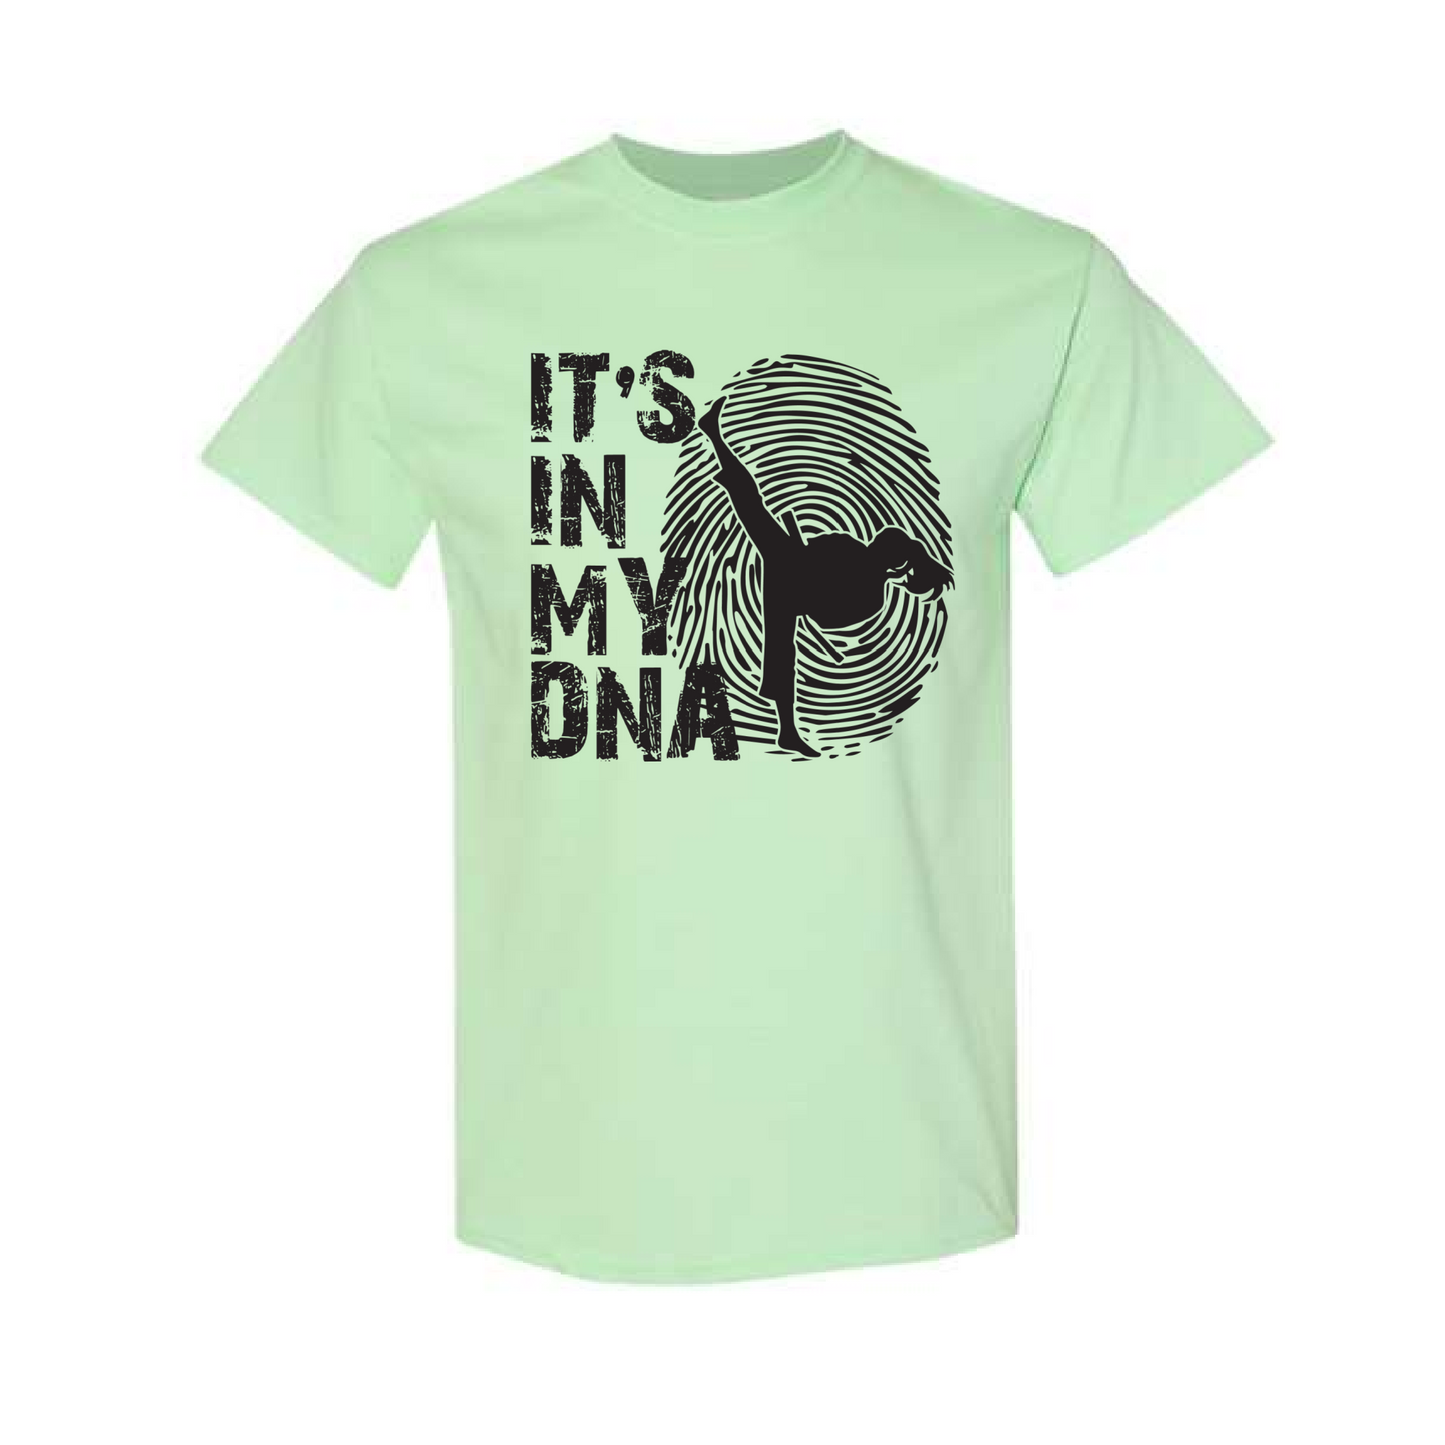 "It's in my DNA" T-Shirt